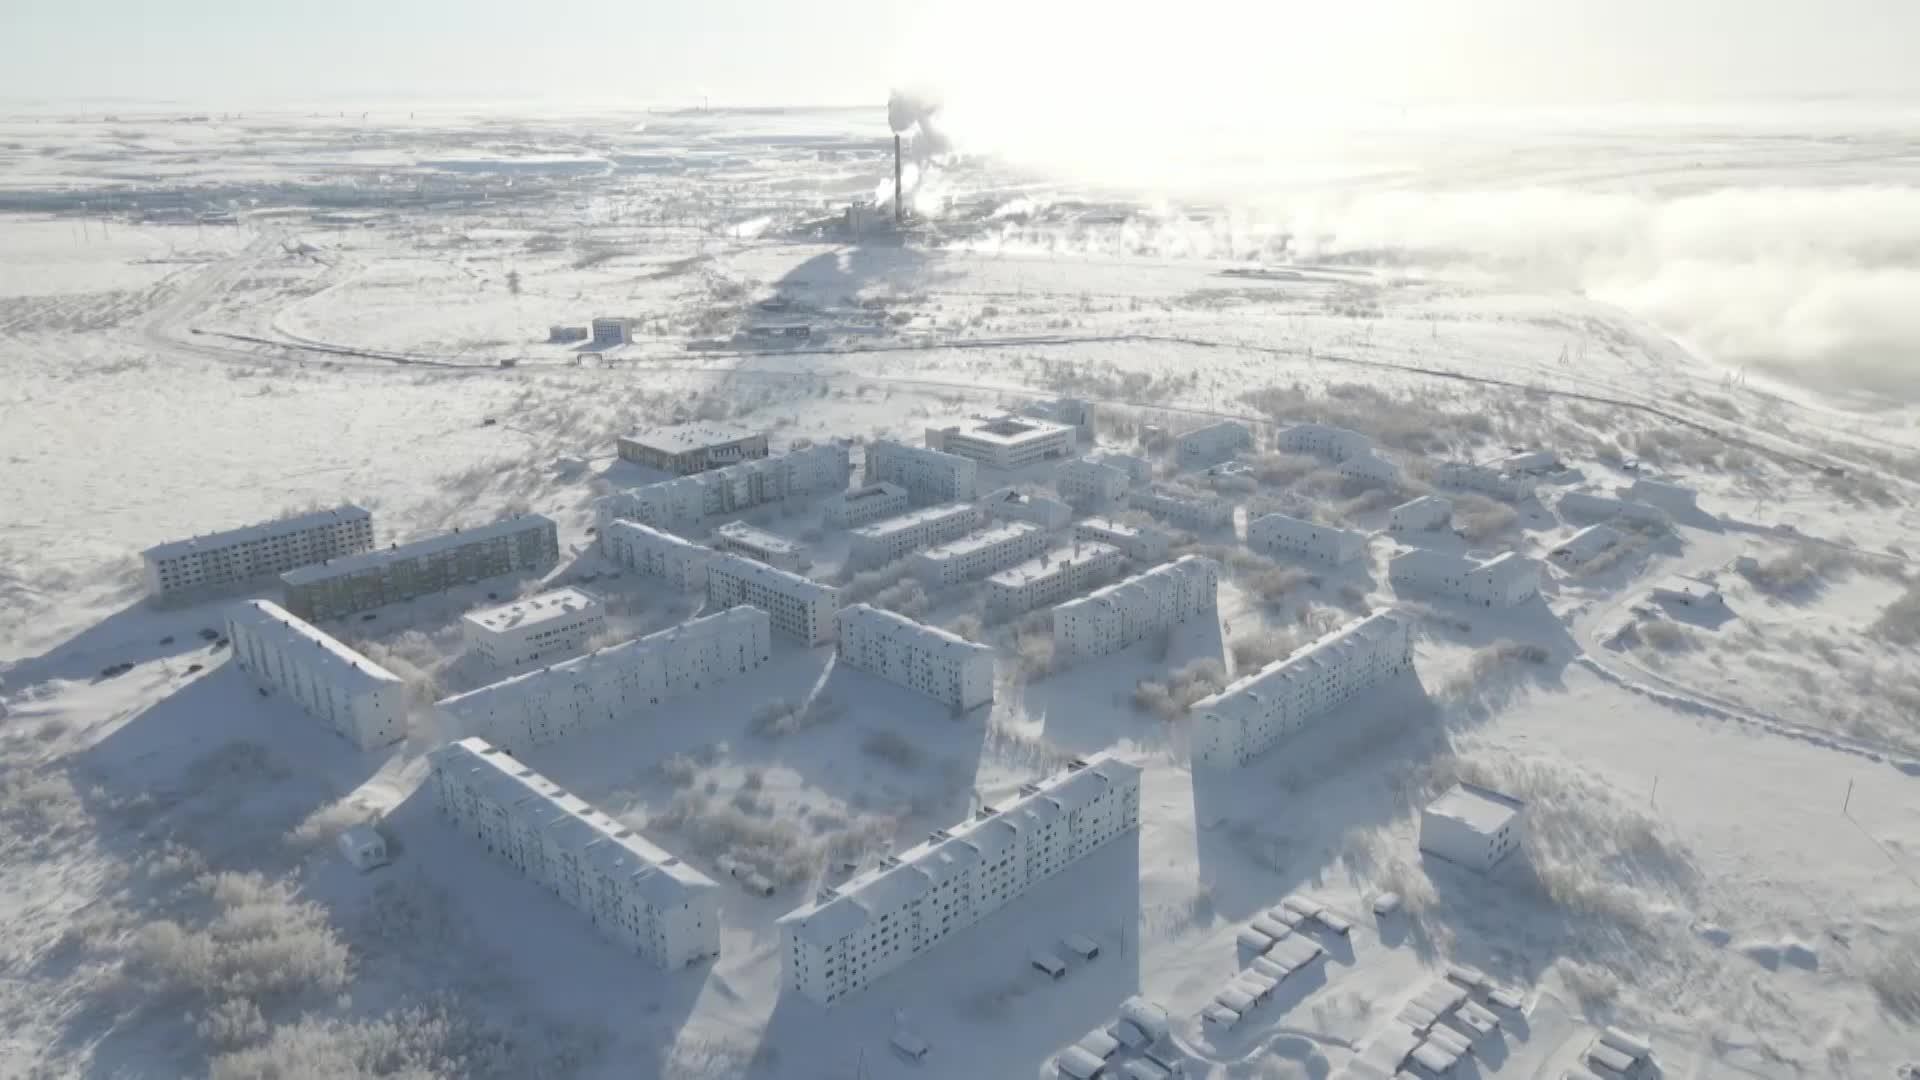 Russian Ghost Town Buried in Snow from The Weather Channel